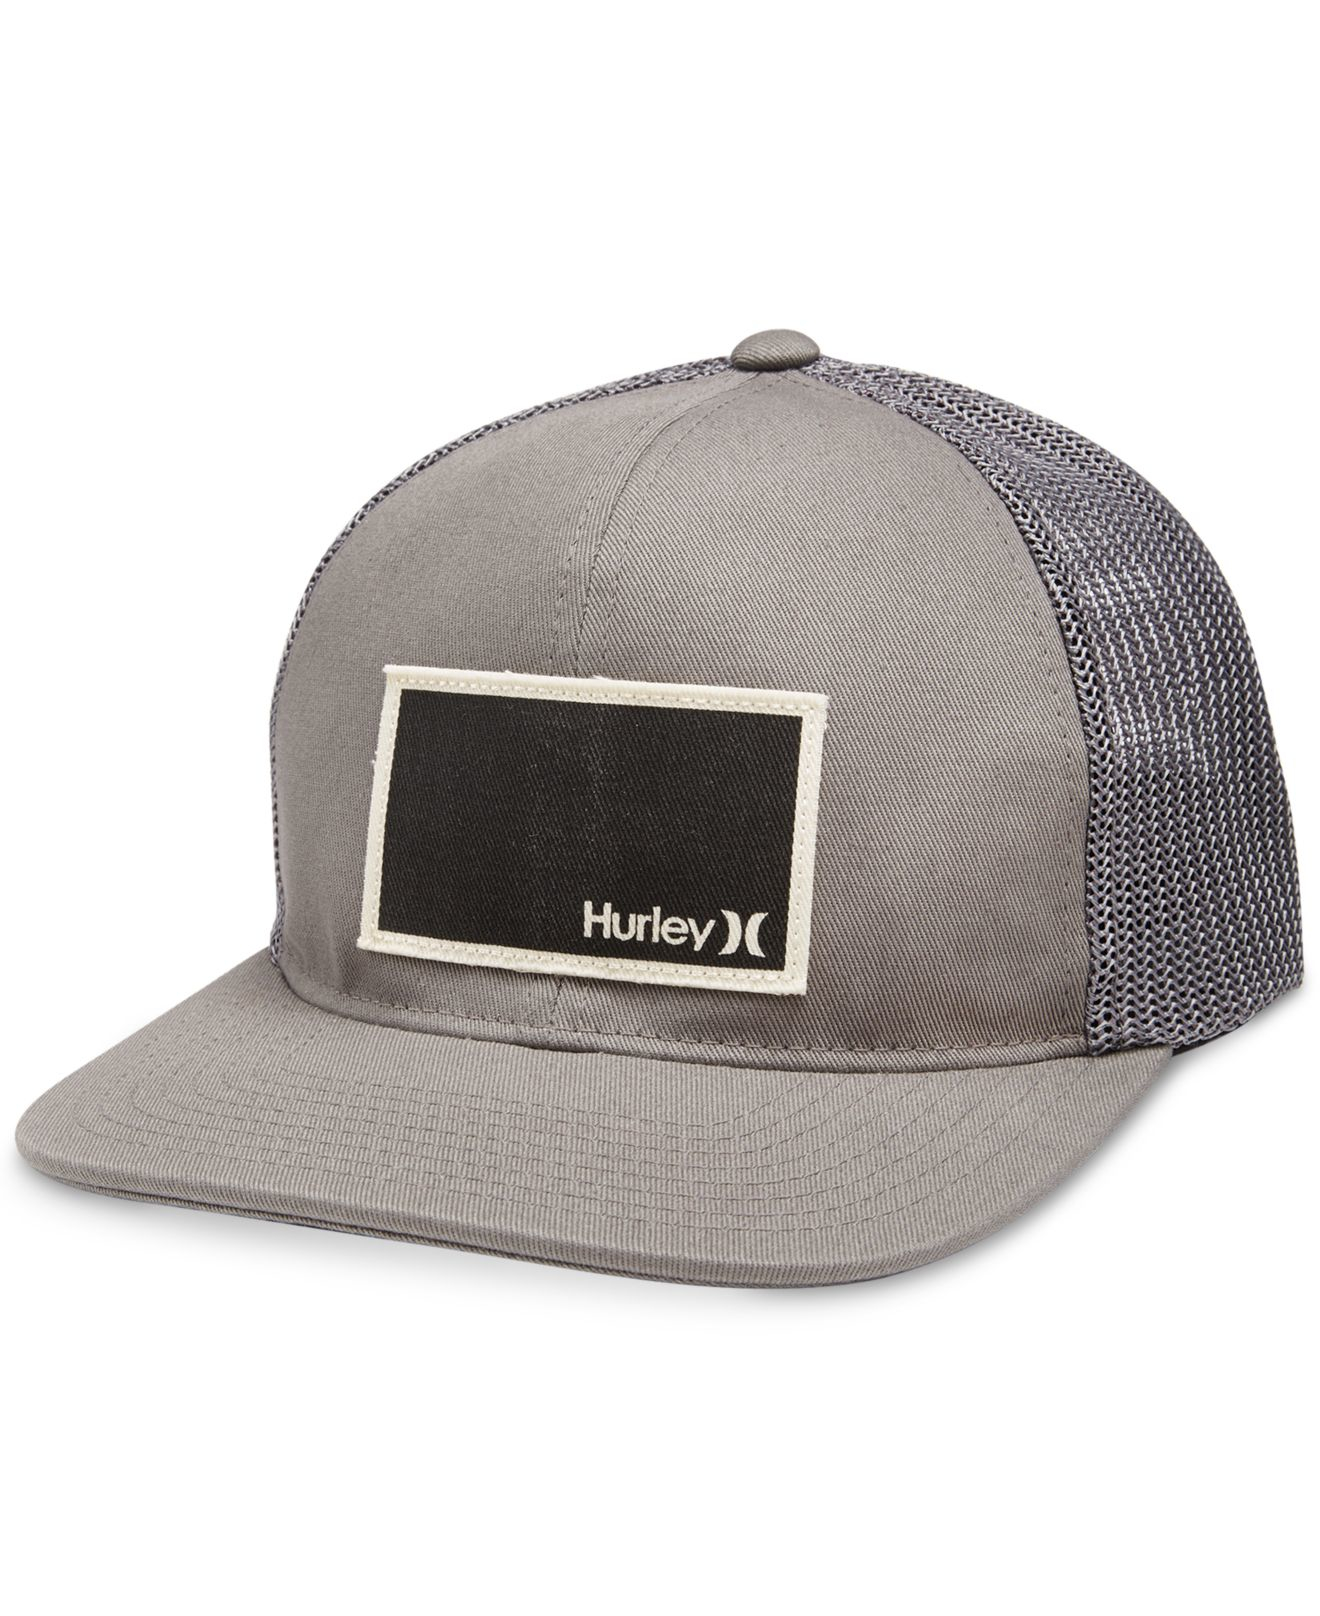 Lyst - Hurley Verdone Fit In Hat in Gray for Men1320 x 1616